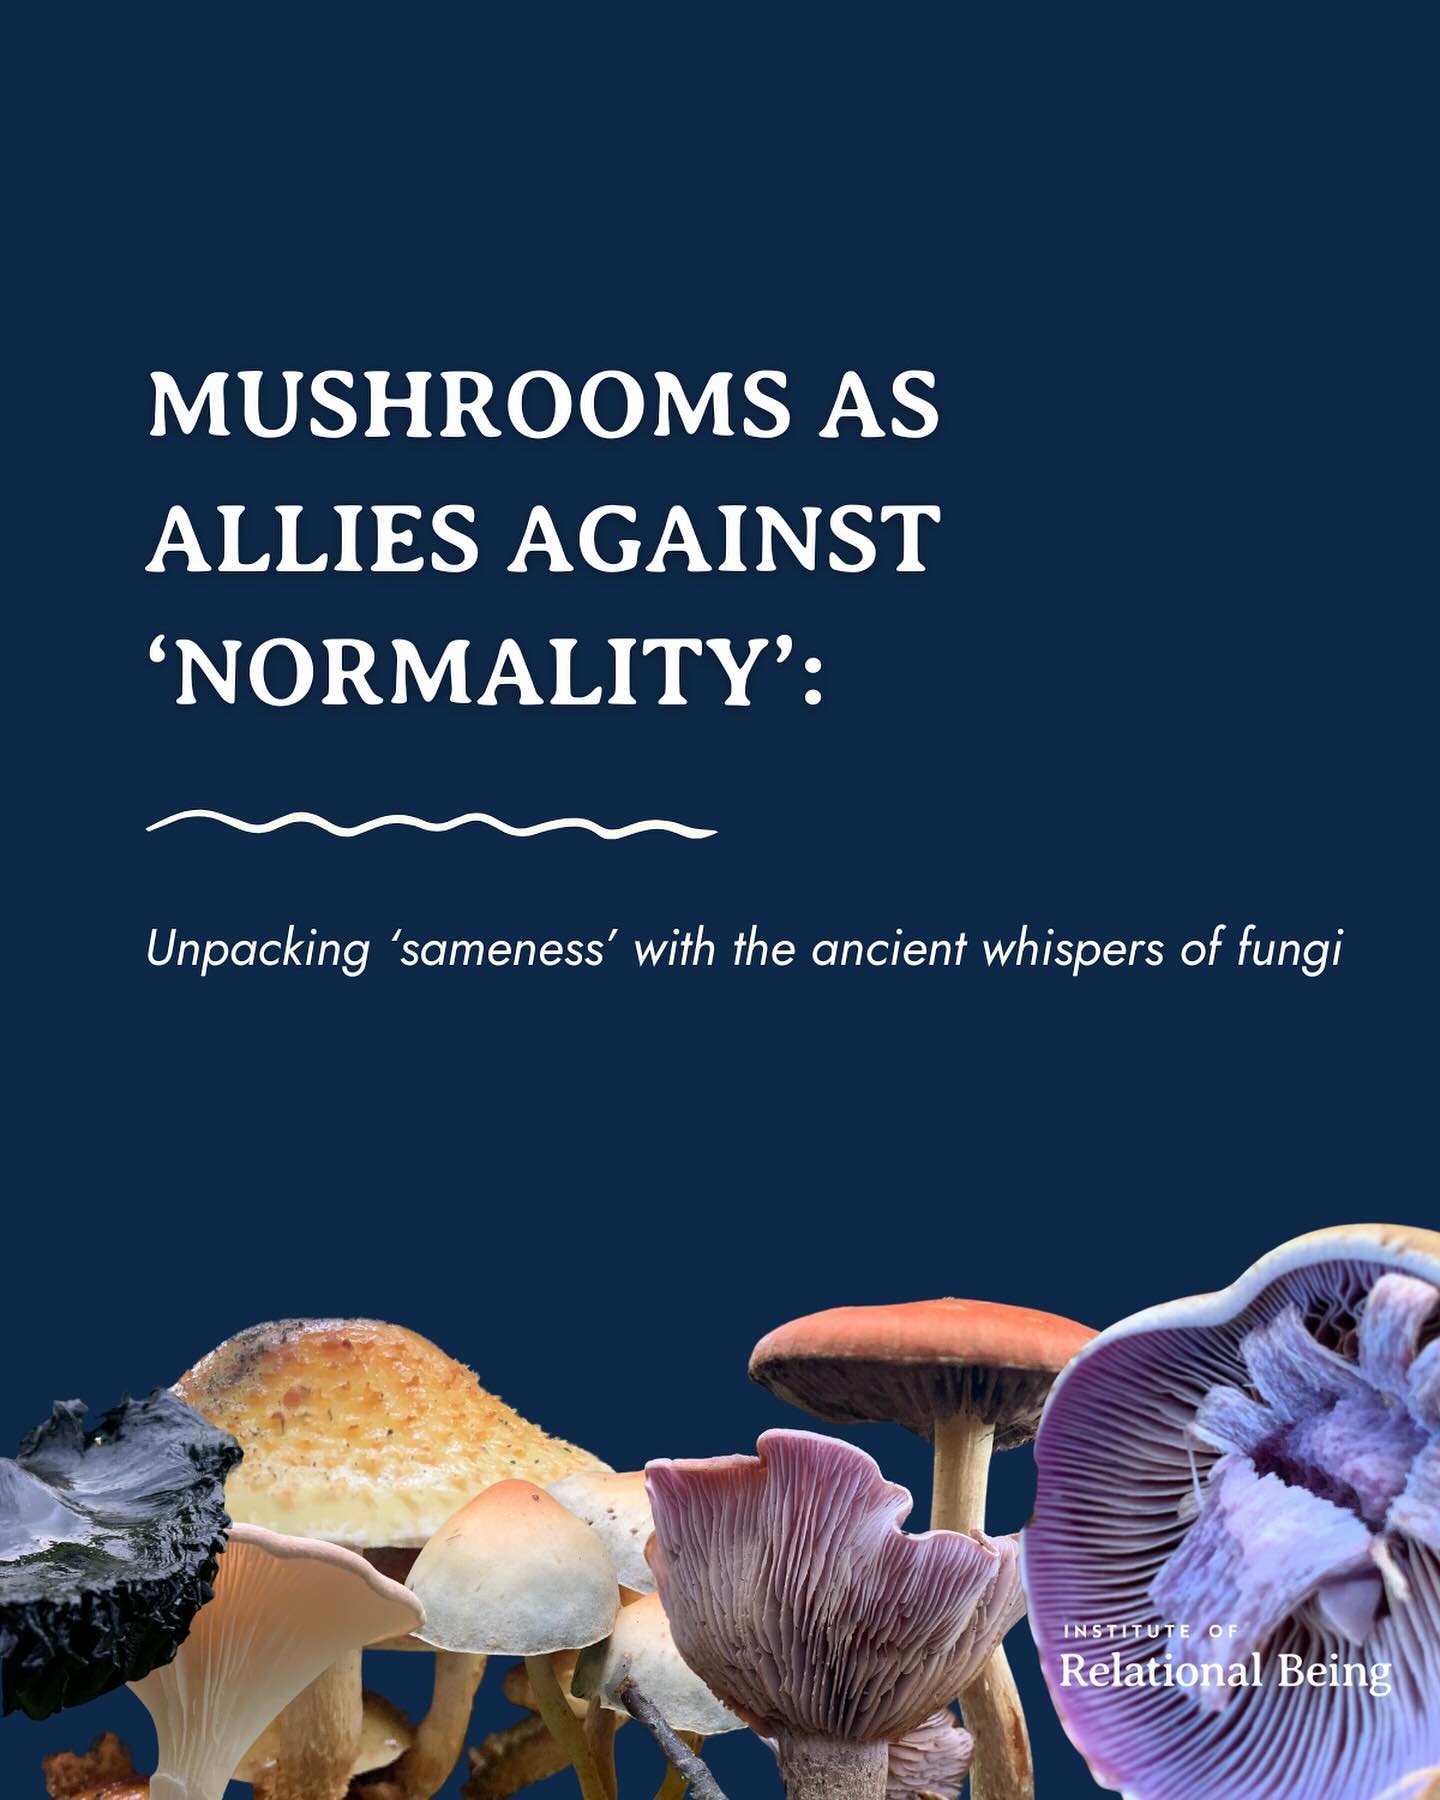 🌎 Humanity stands at a pivotal moment, confronting the consequences of centuries of imposed &lsquo;normalcy.&rsquo; From the shadows of this narrative, mushrooms emerge as profound teachers, celebrating diversity and defying molds.

In the quest for